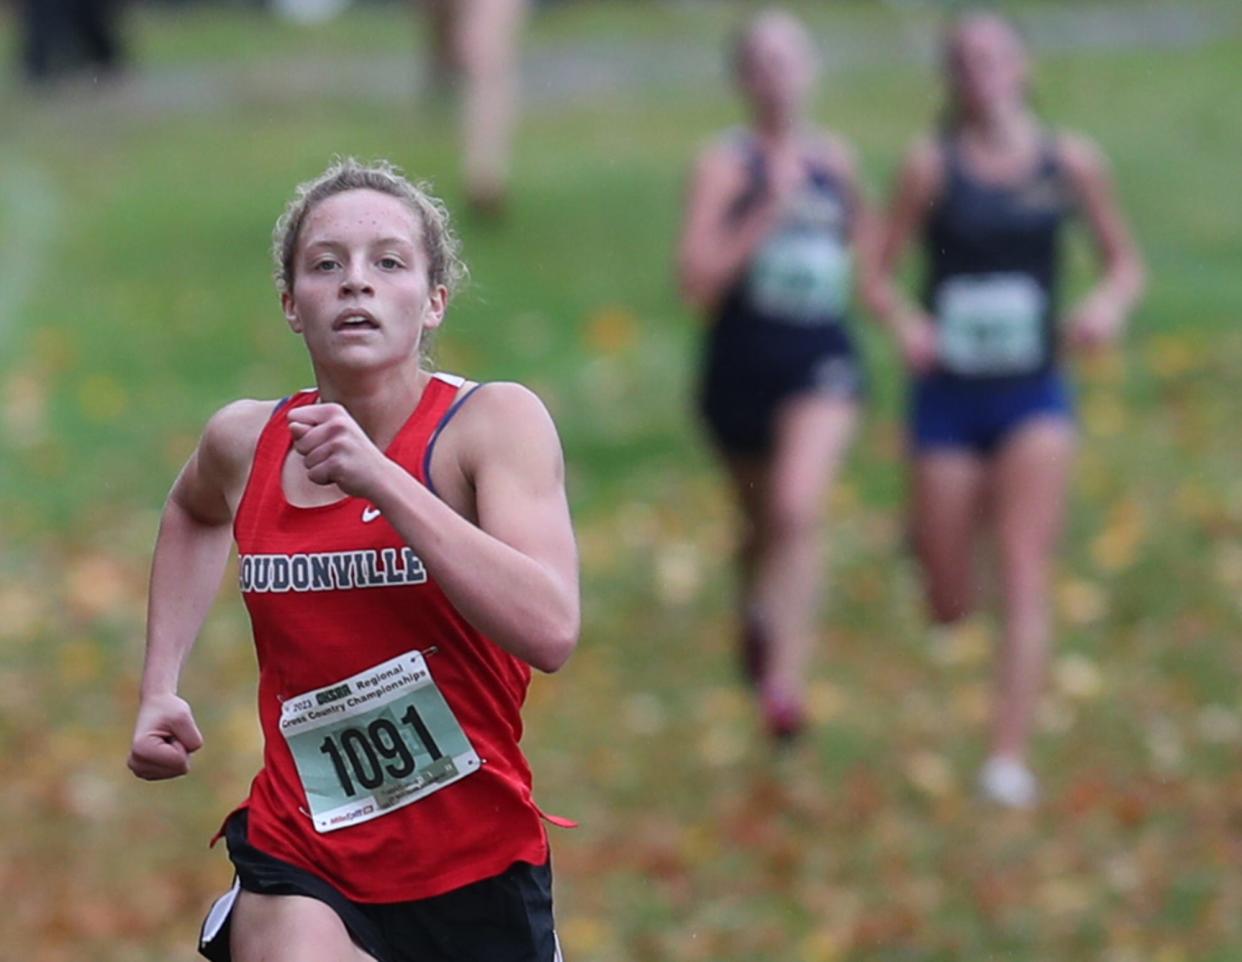 Loudonville's Tess Shultz runs during the cross country season, where she thrived while gaining endurance for track season.